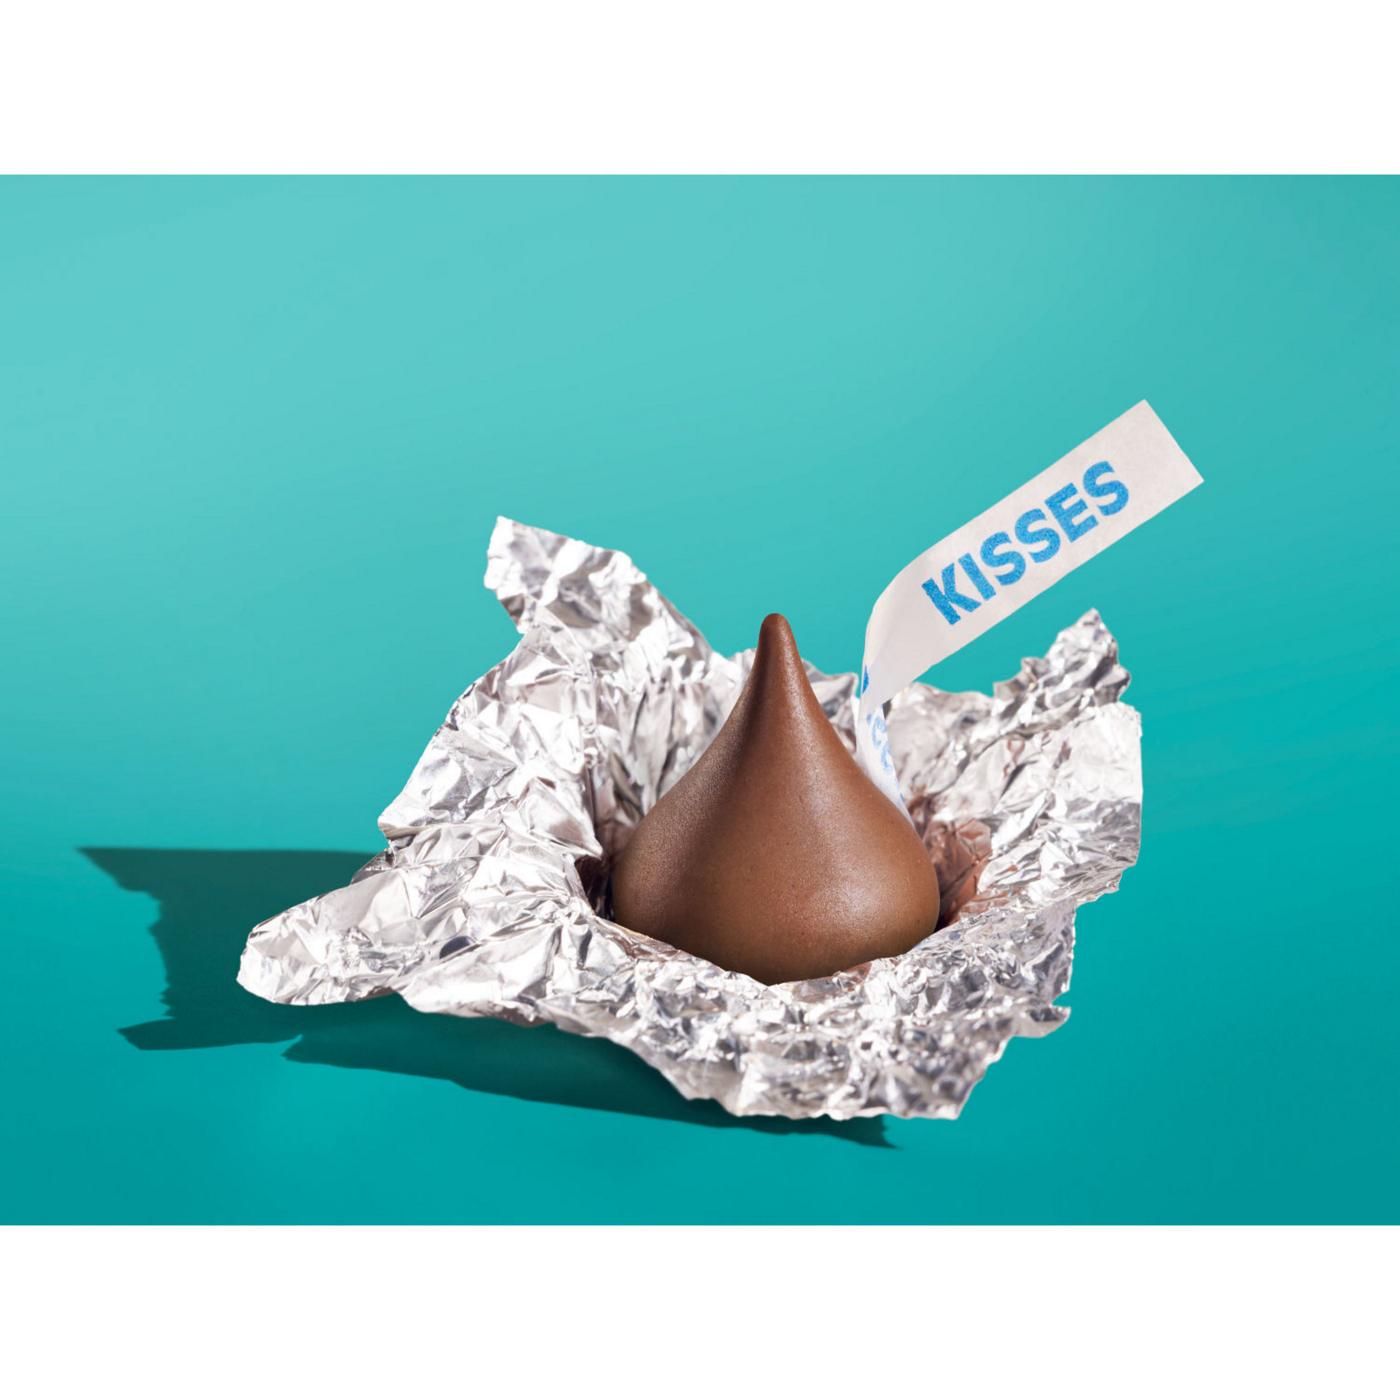 Hershey's Kisses Milk Chocolate Candy - Share Pack; image 2 of 7